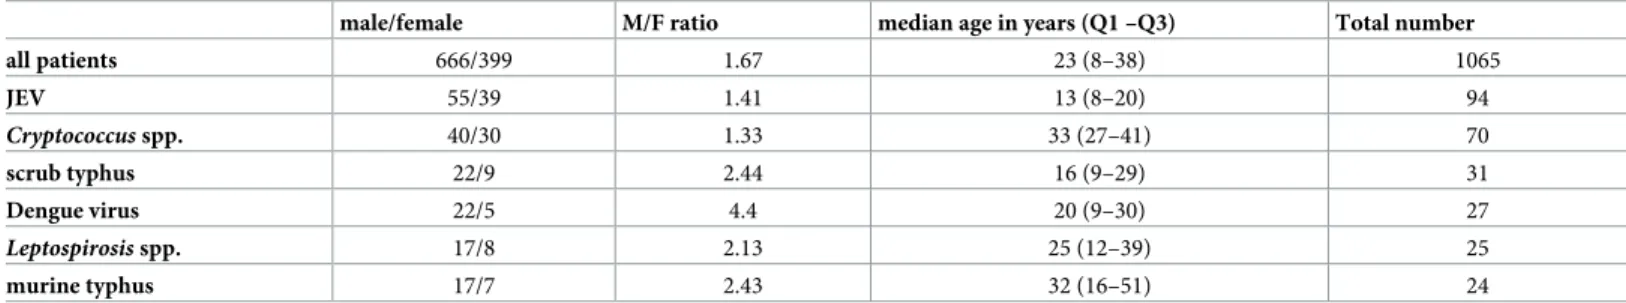 Table 2. Age and gender of study patients. (Q1 and Q3 indicate the first and third quartiles, respectively).